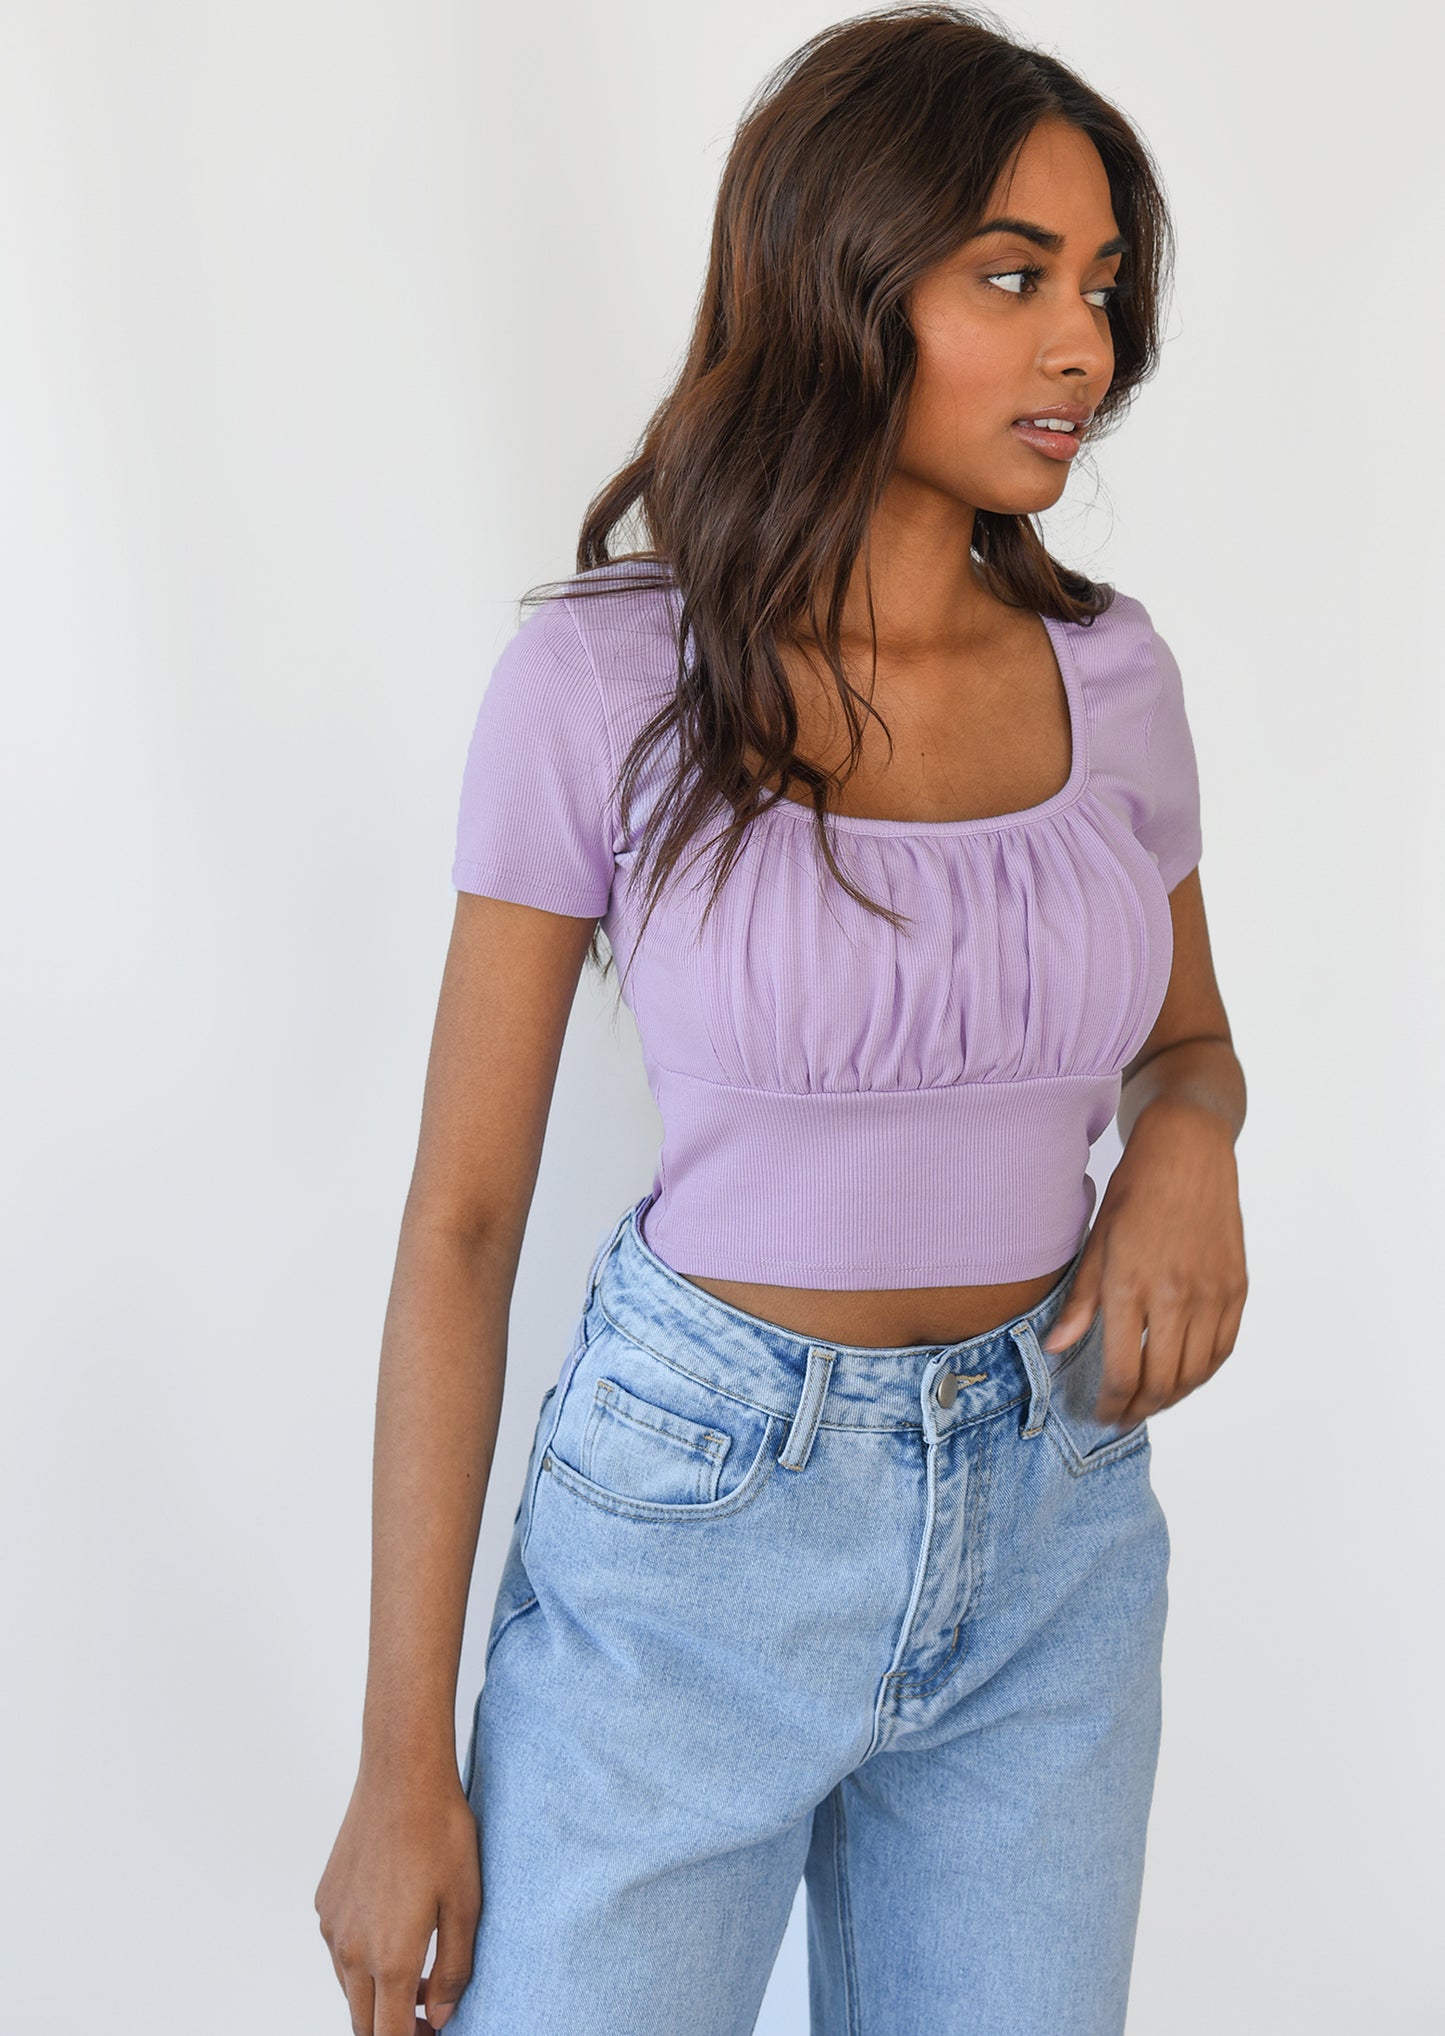 Ruched t-shirt in lilac